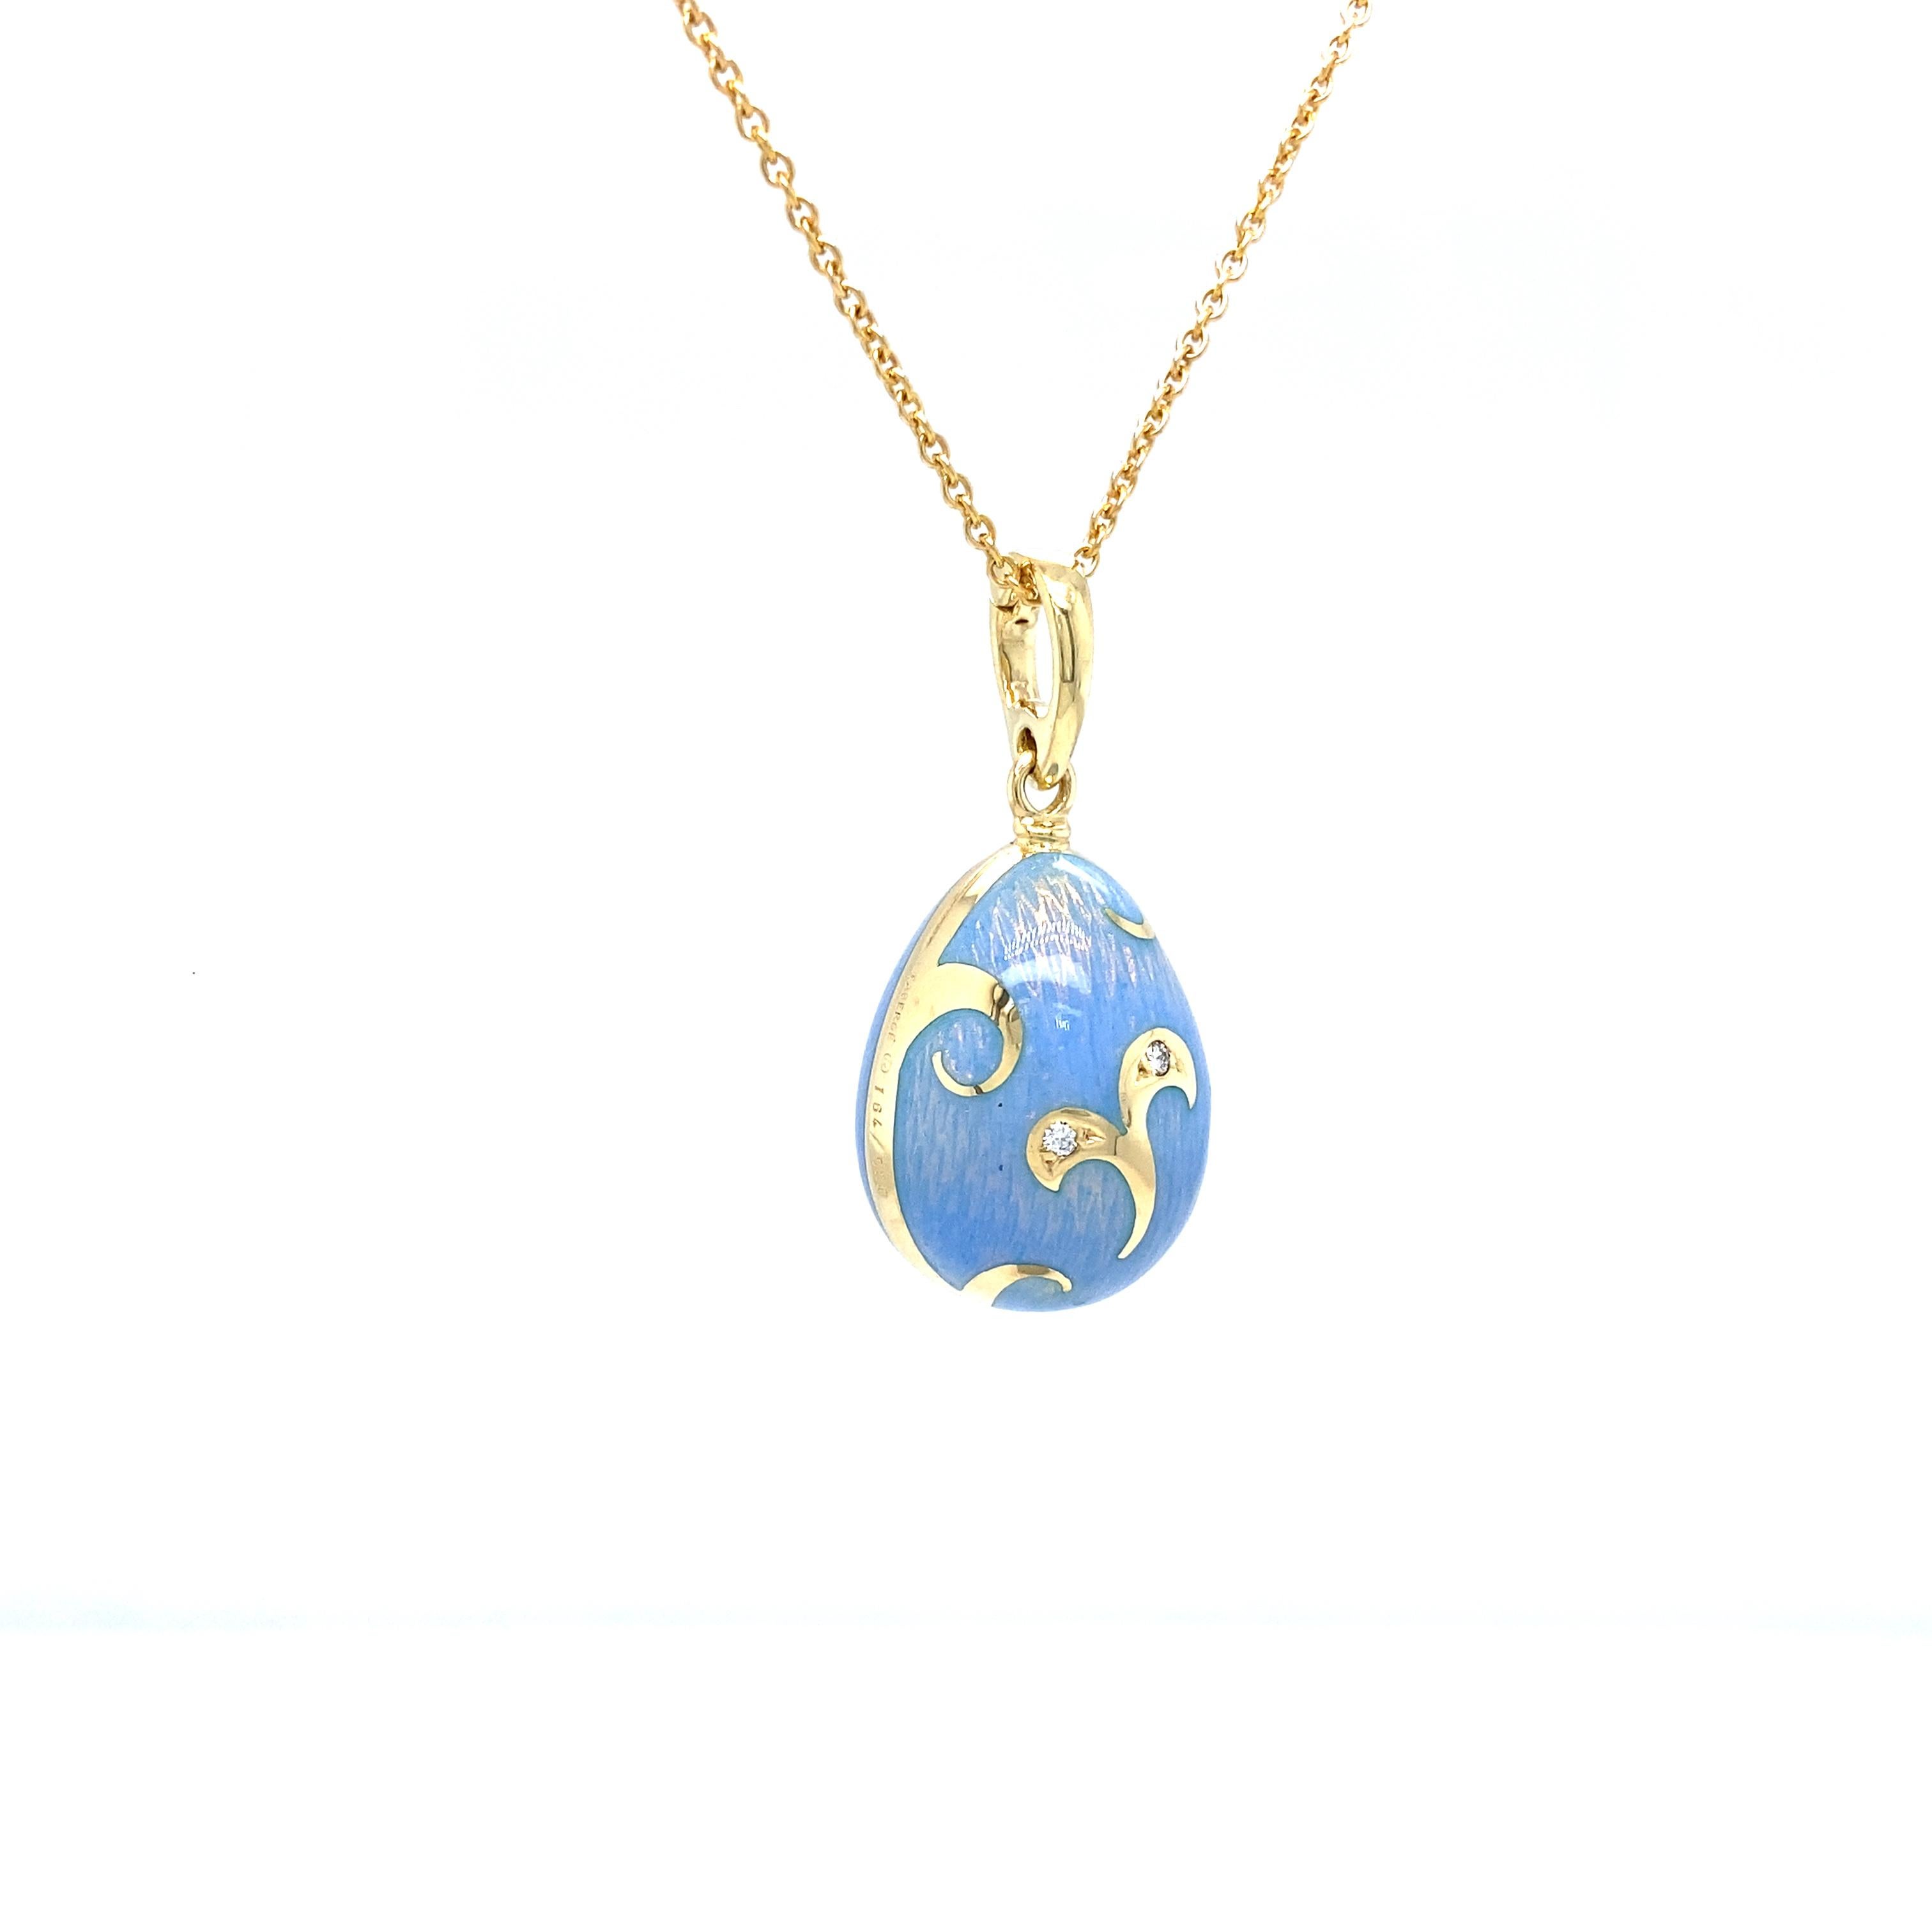 Fabergé egg pendant,  limted edition, 18k yellow gold, translucent opalescent light blue, 2 brilliant cut diamonds 0.02 ct G VS

Reference: F1793/OB/00/00/102
Brand: Faberge
Workmaster: Victor Mayer
Design inspiration: Rocaille / Rococo
Material: